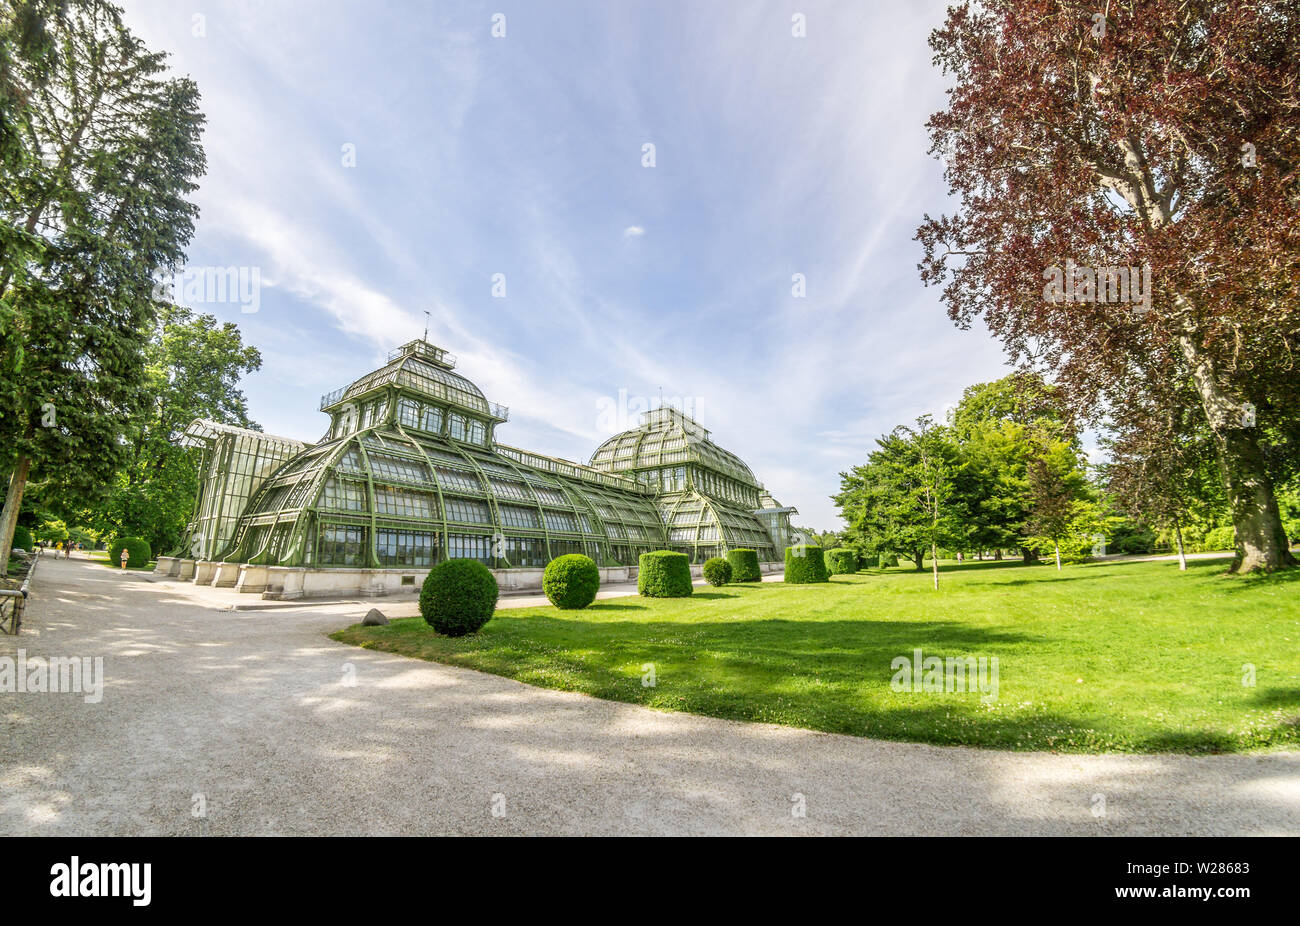 Vienna Austria June.18, 2918:The Palmenhaus in Schonbrunn Palace Park, Vienna, Austria The Palmenhaus Schonbrunn is a large greenhouse featuring plant Stock Photo